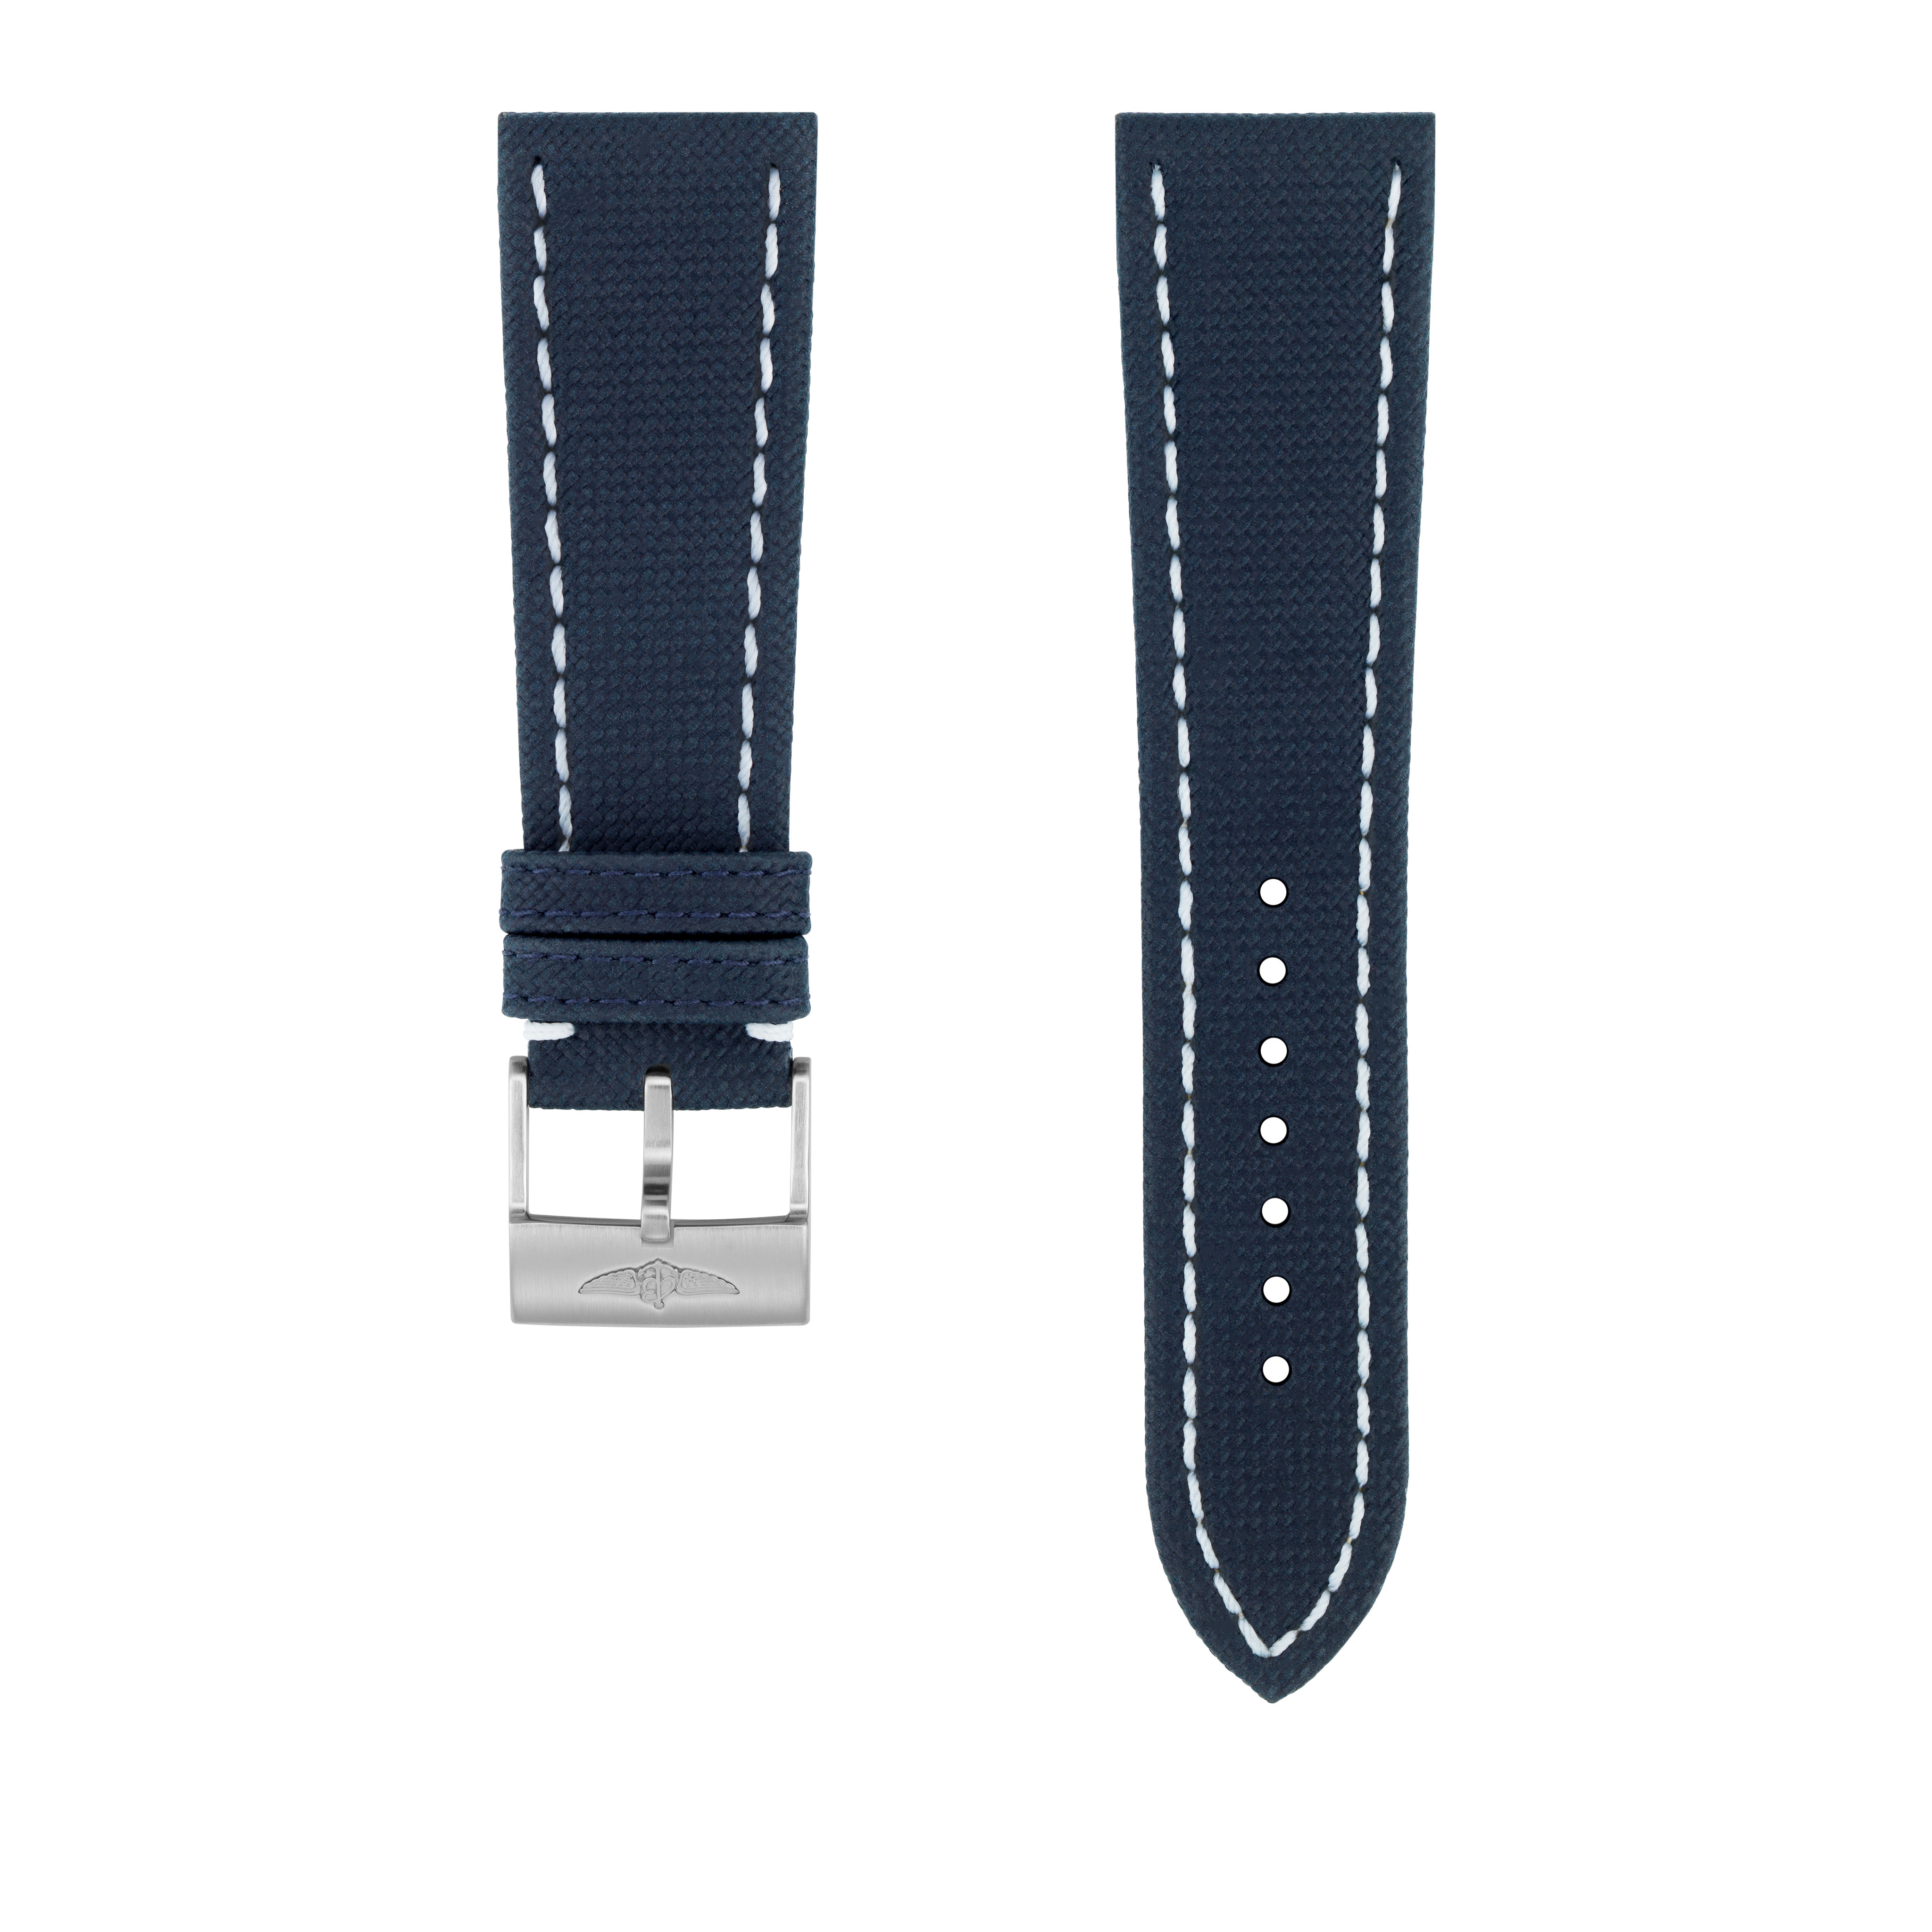 Blue military calfskin leather strap - 24 mm